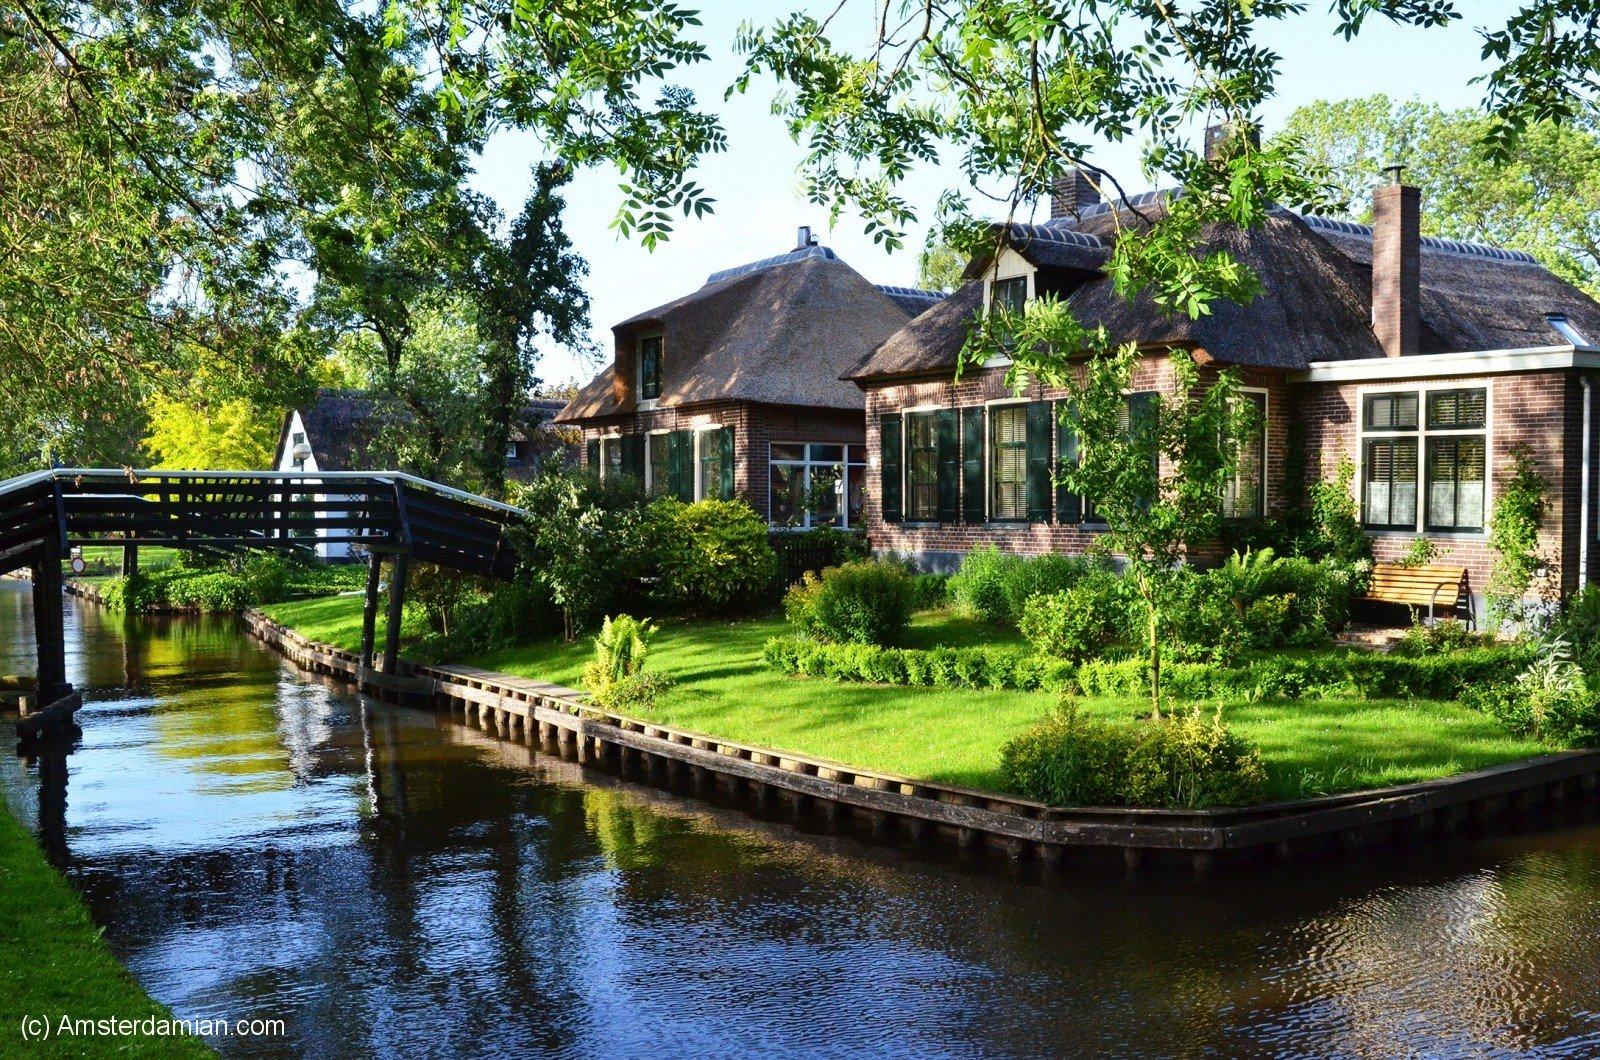 A magical place: Giethoorn, the village with no roads